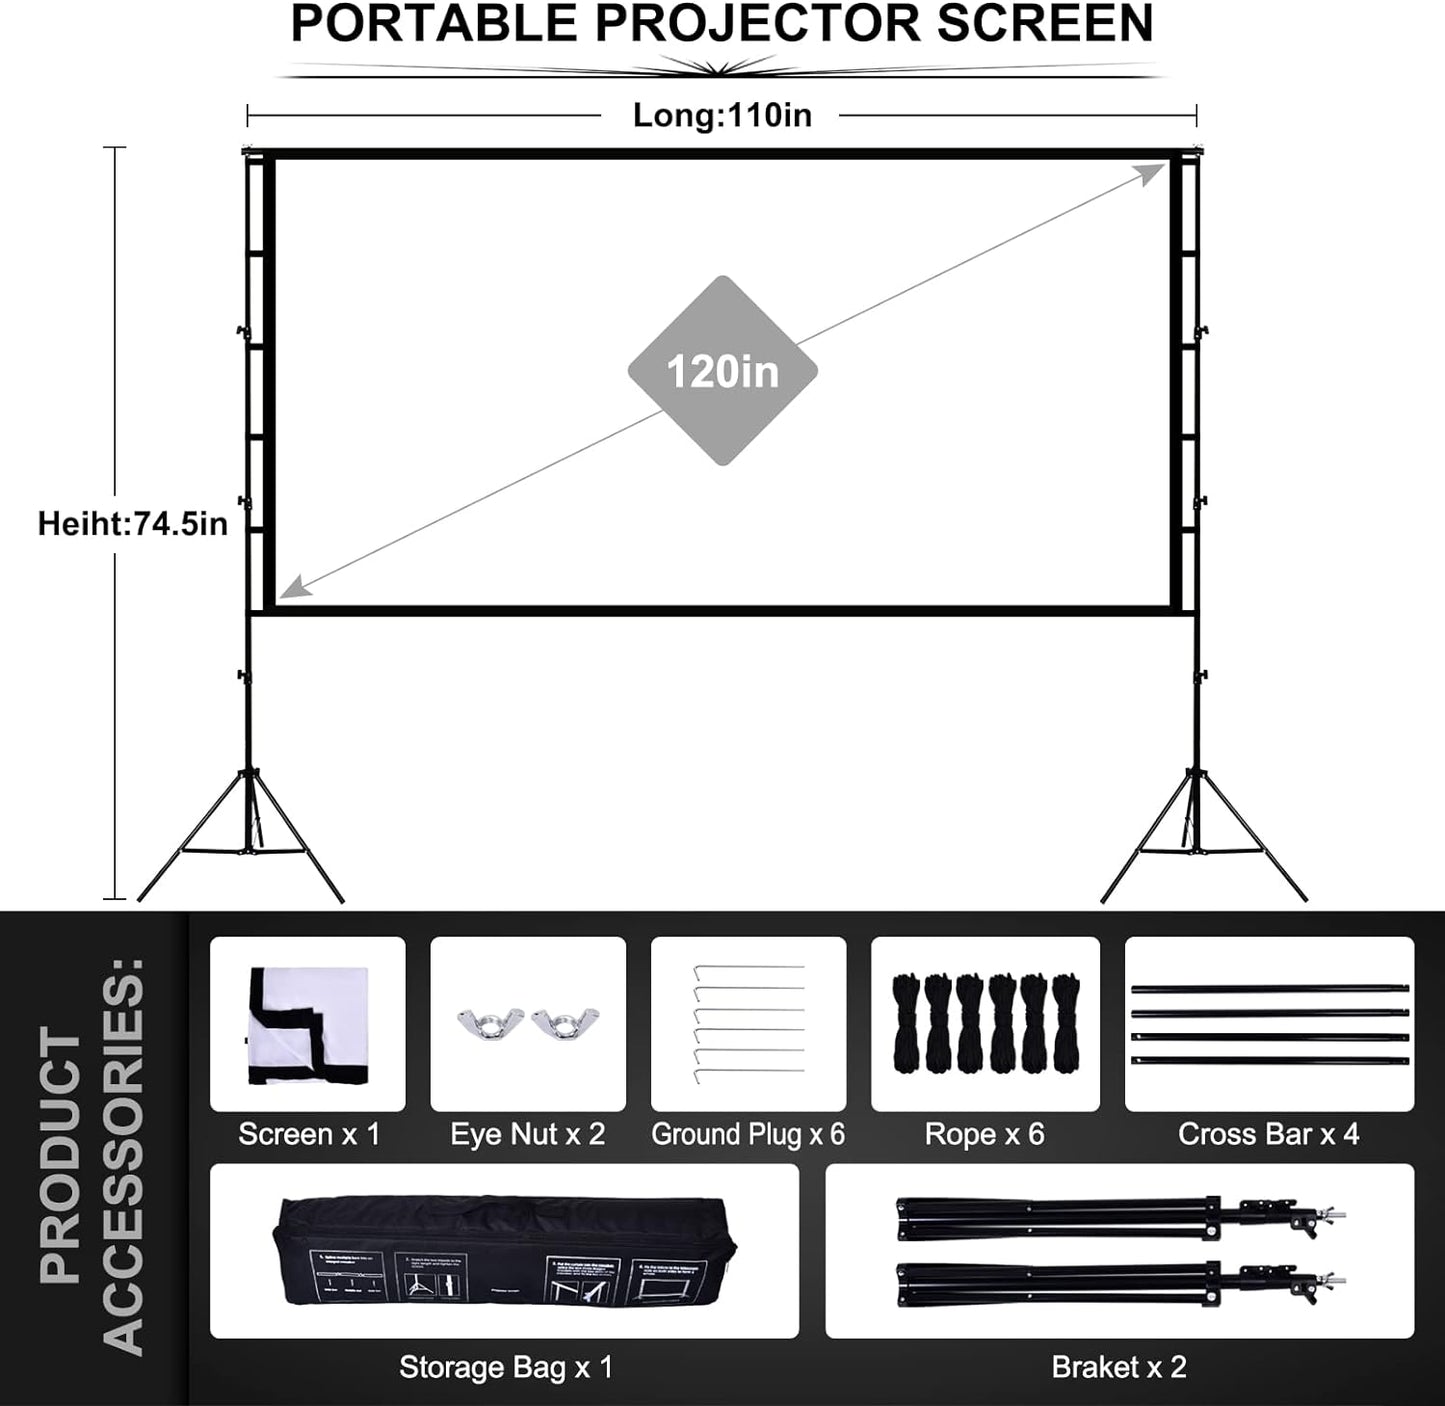 Large 120 Inch Portable Projector Screen with Stand, Assemblable and Detachable Movie Projection Screen Outdoor & Indoor